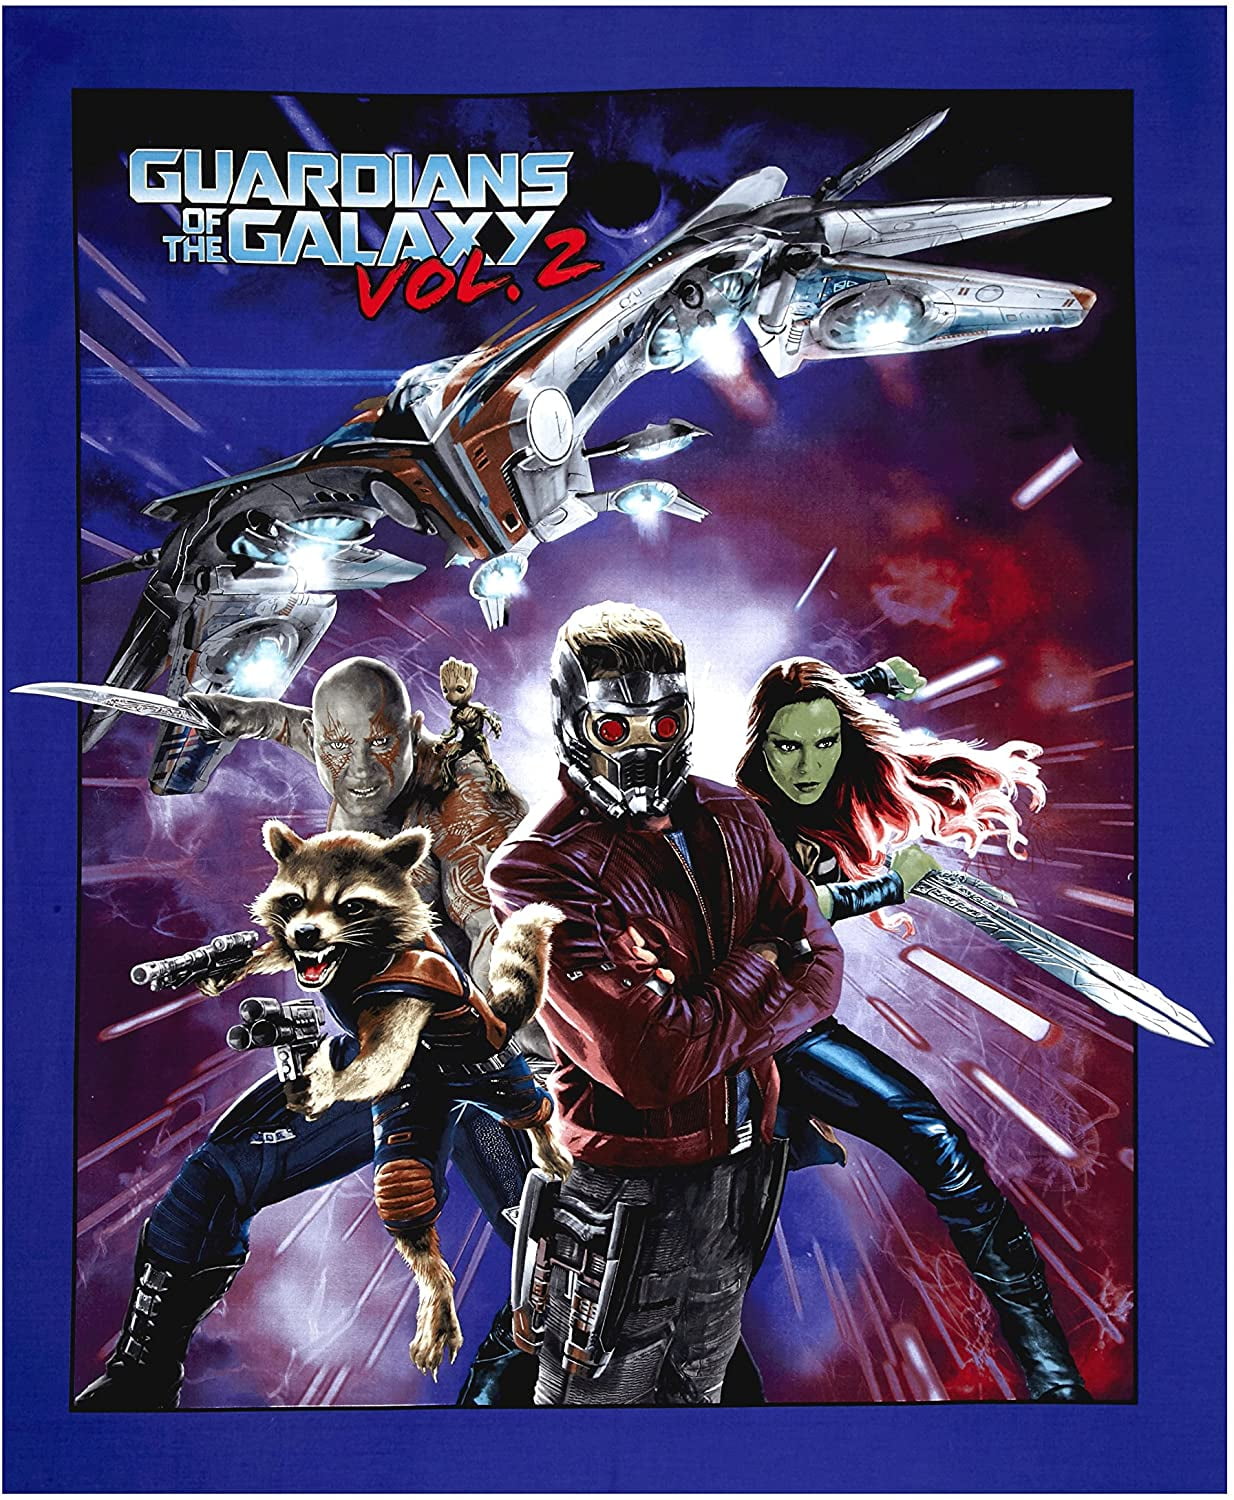 Marvel Guardians of the Galaxy Action Print Cotton-Grey